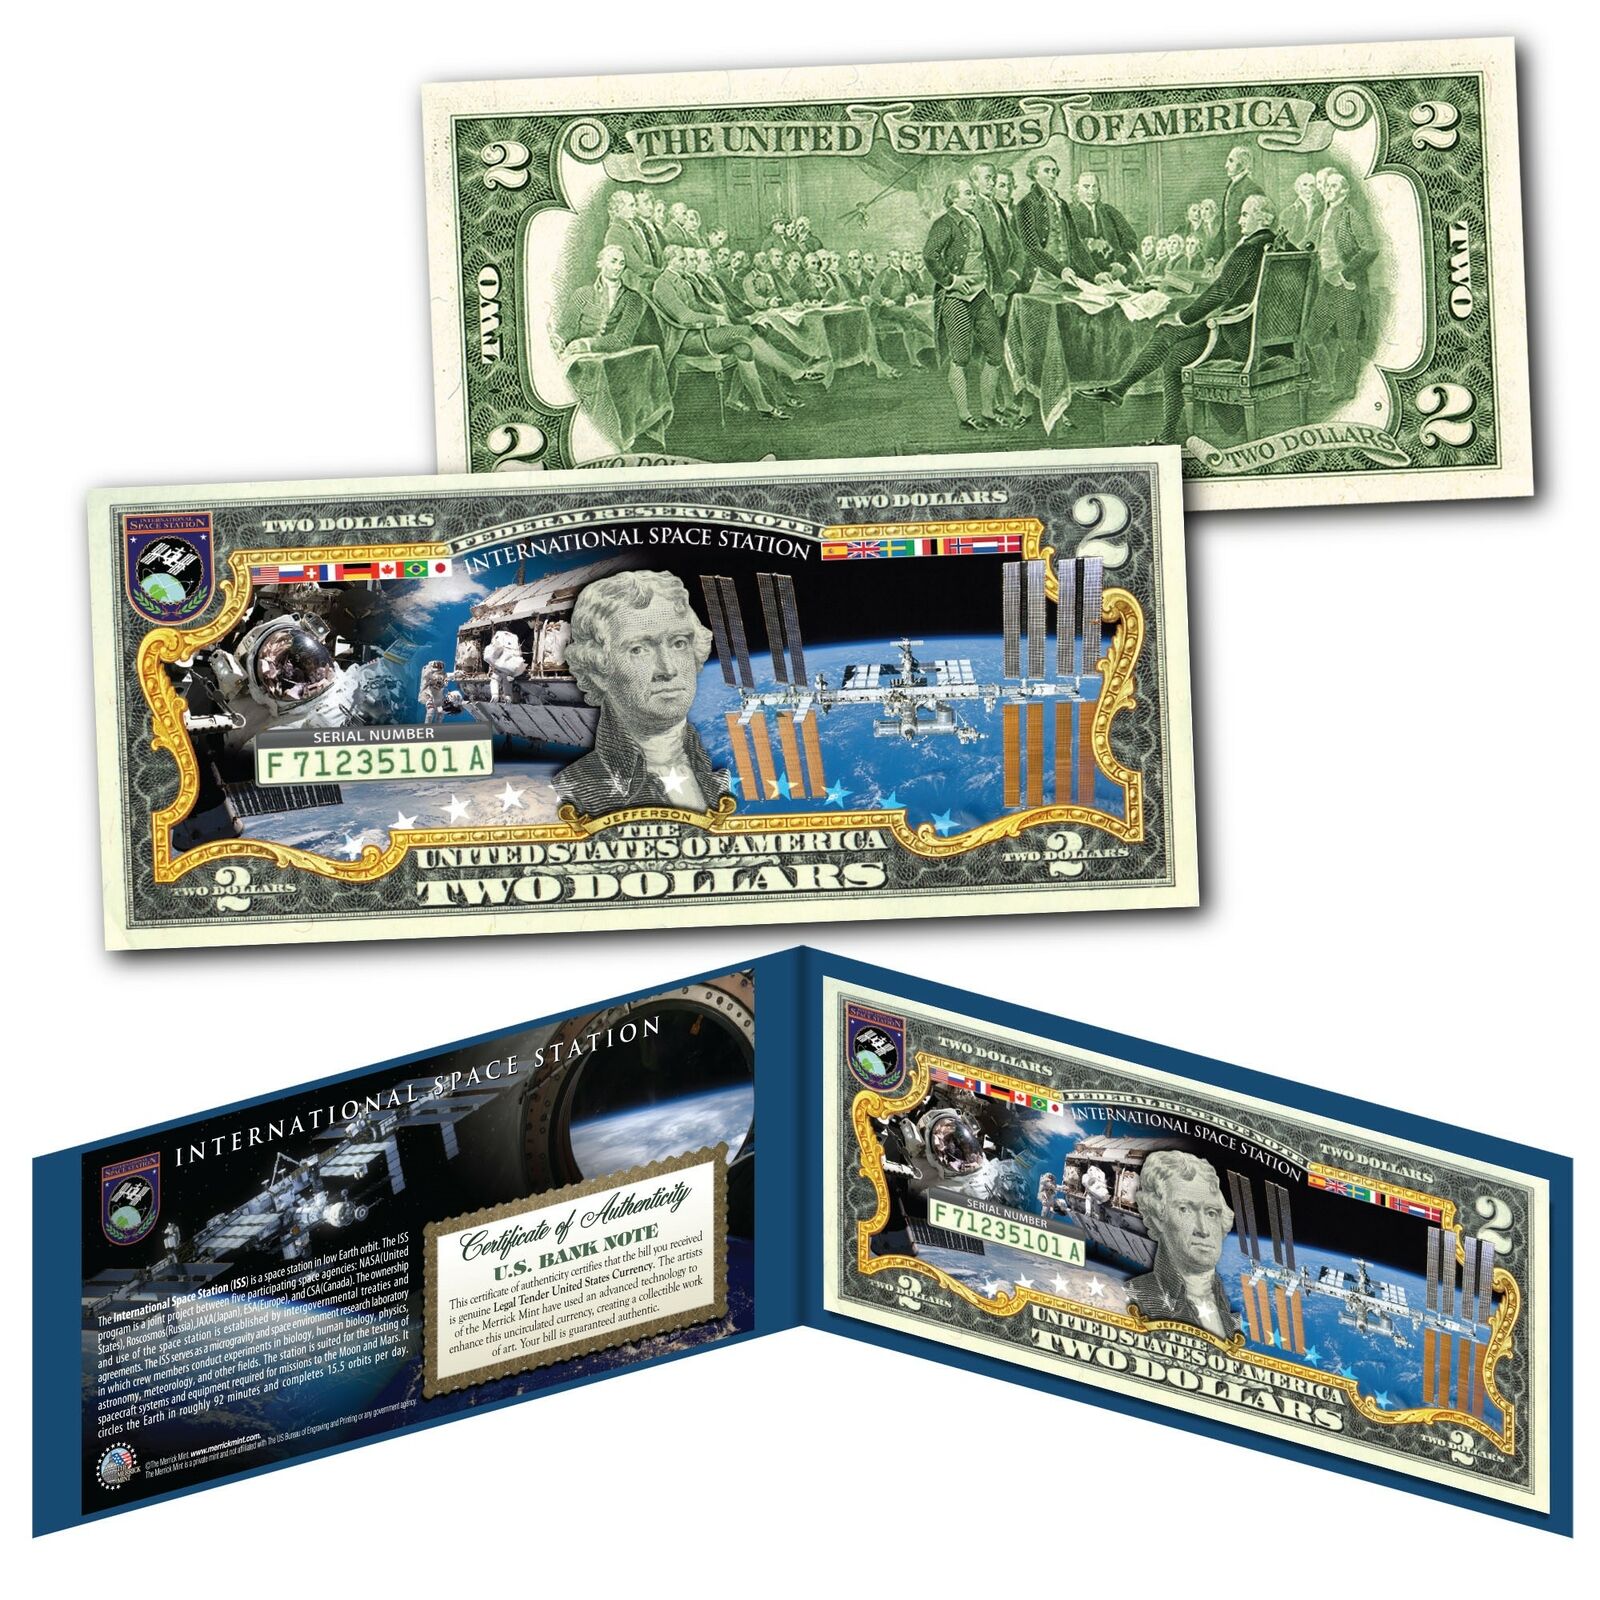 NASA International Space Station Authentic US $2 Bill - Largest Space Structure